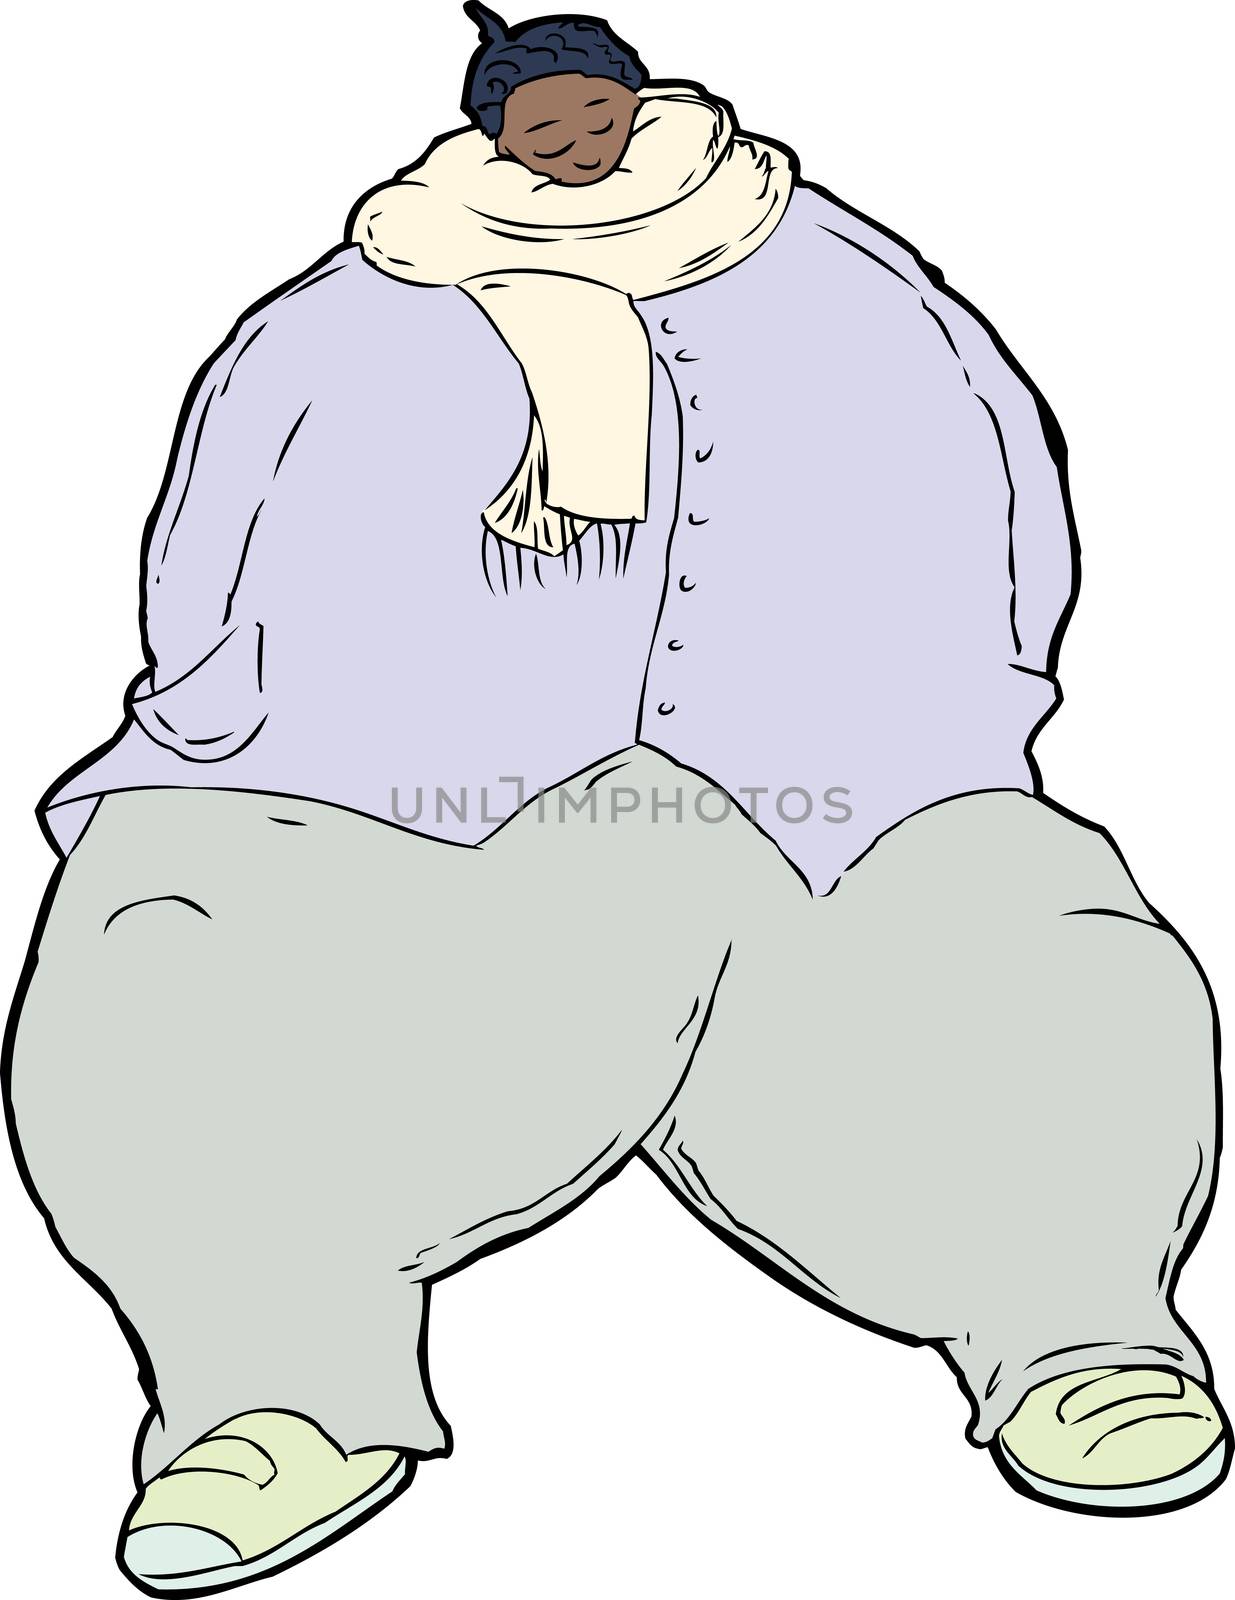 Illustration of single sleeping obese woman wearing in jacket and scarf sitting over white